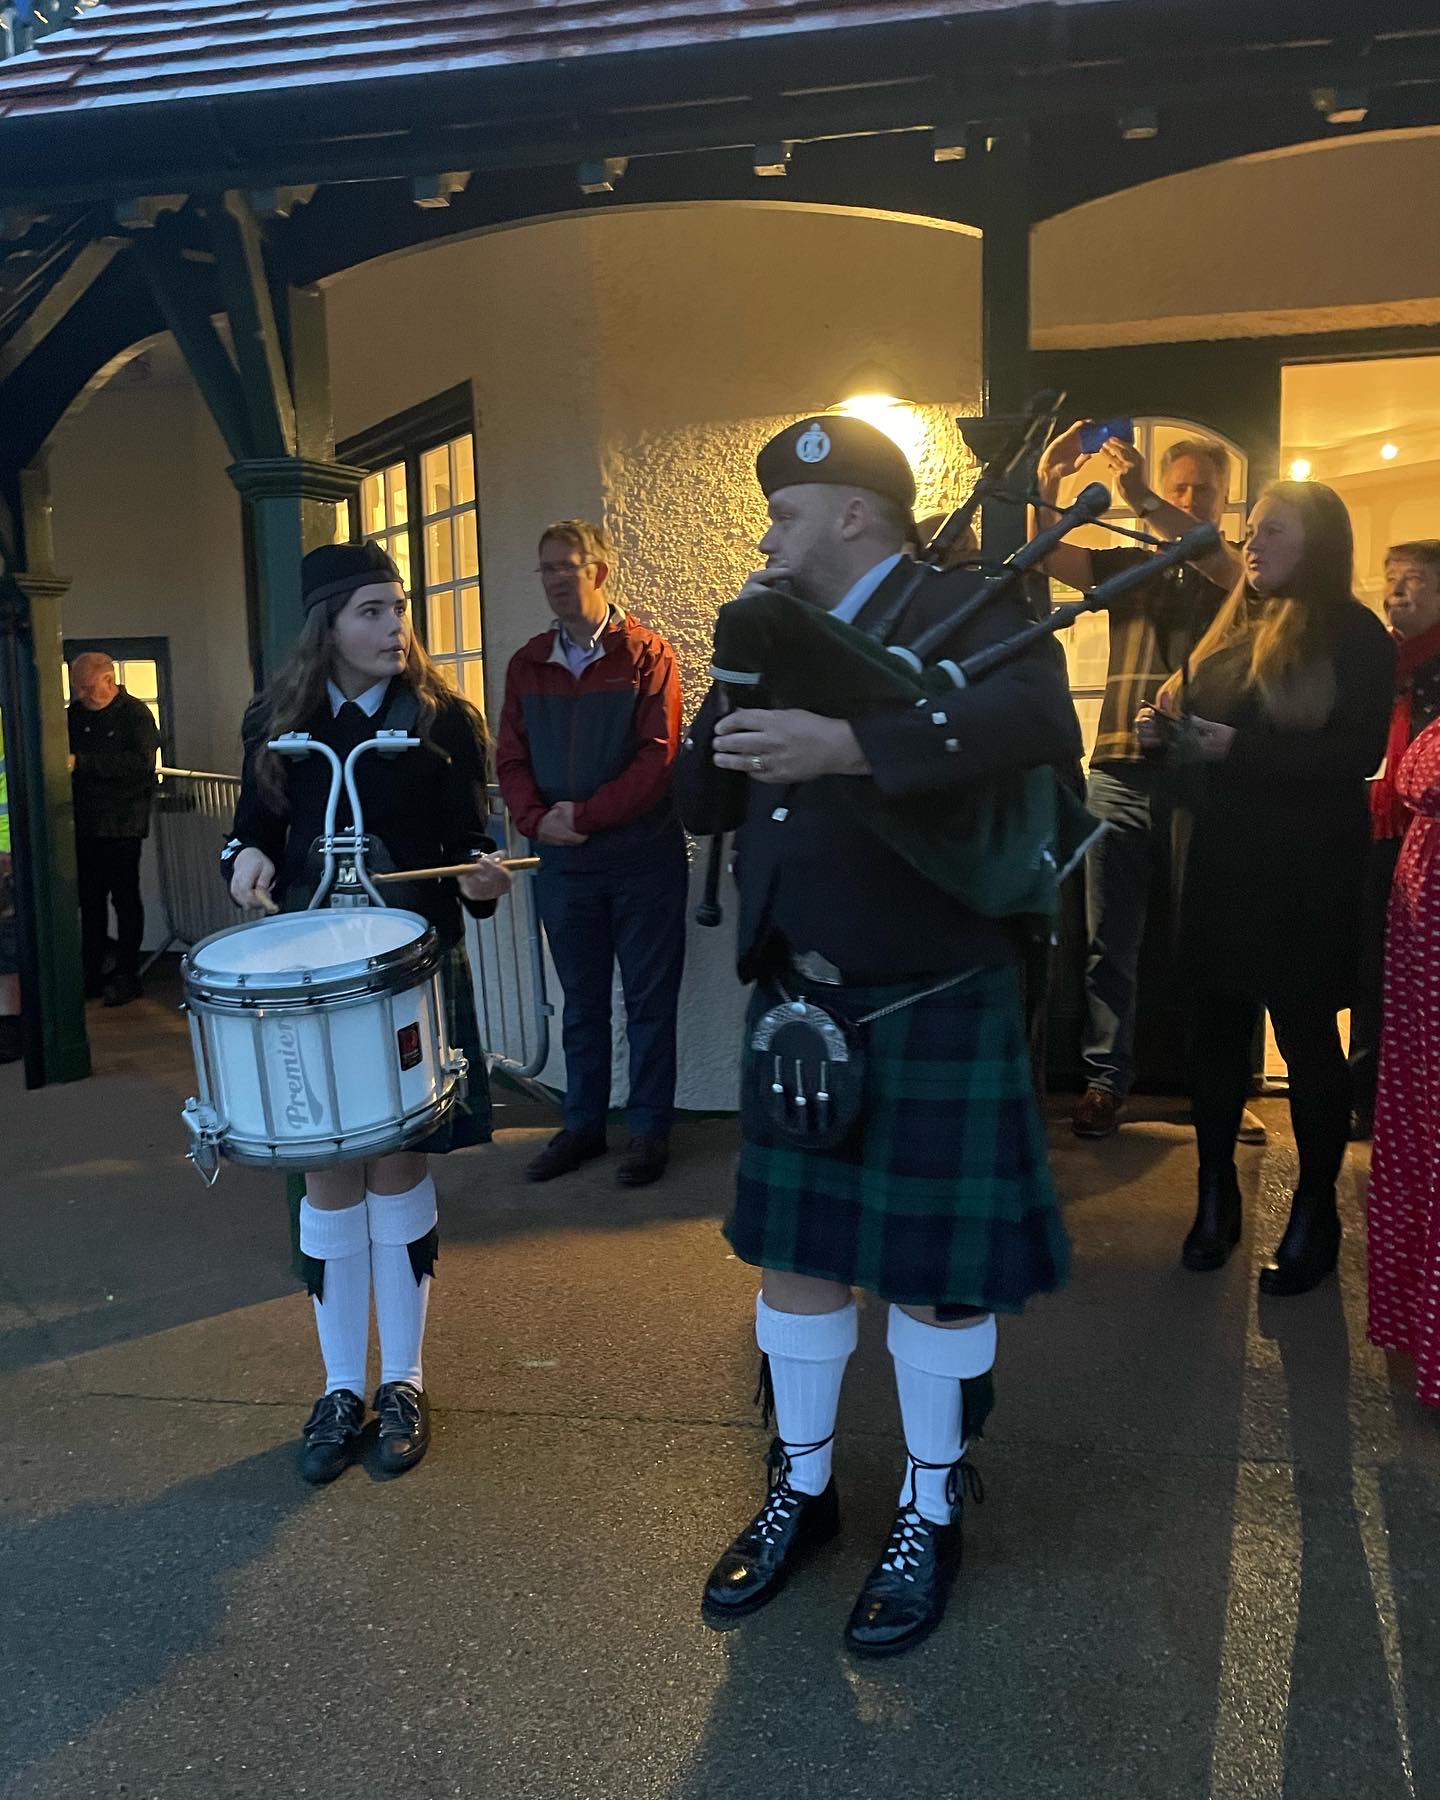 Beacon lighting the mount jubilee pipers